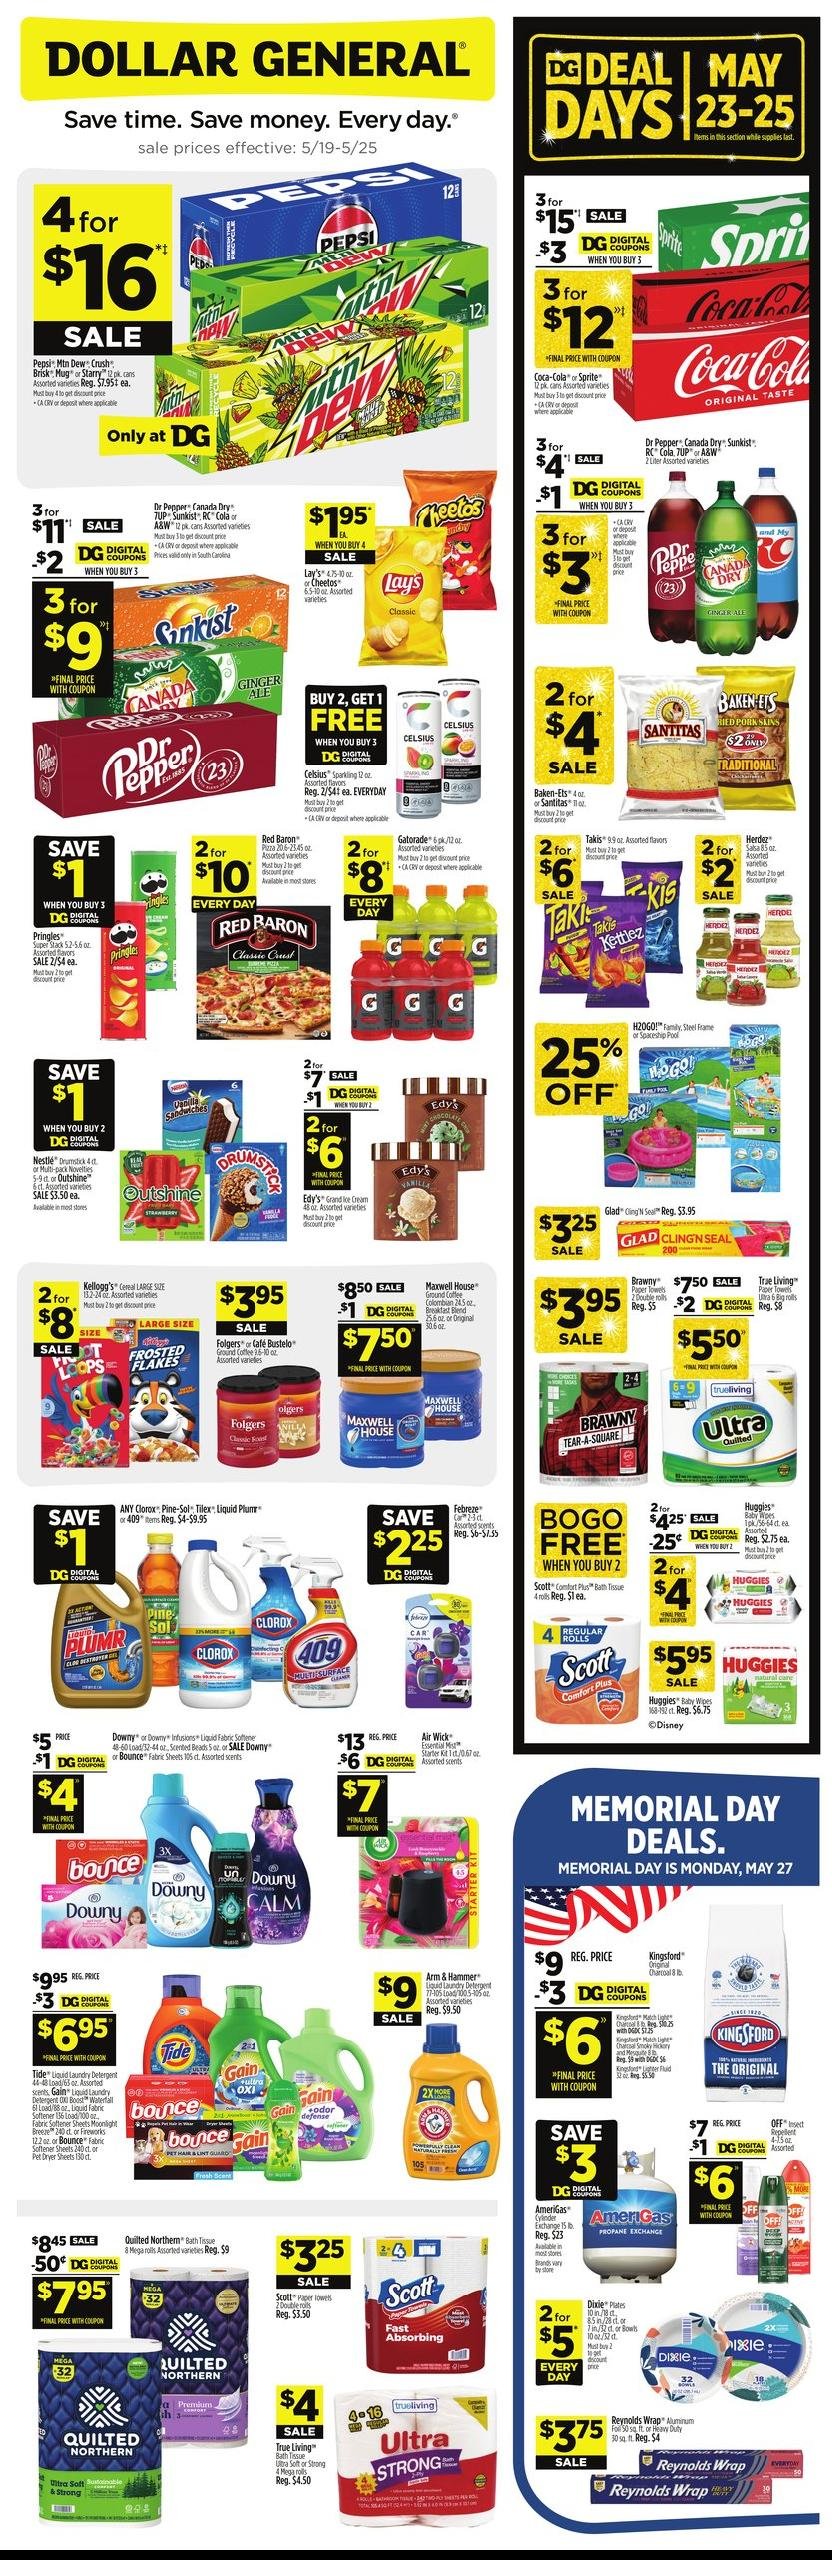 Dollar General weekly ad - page 1